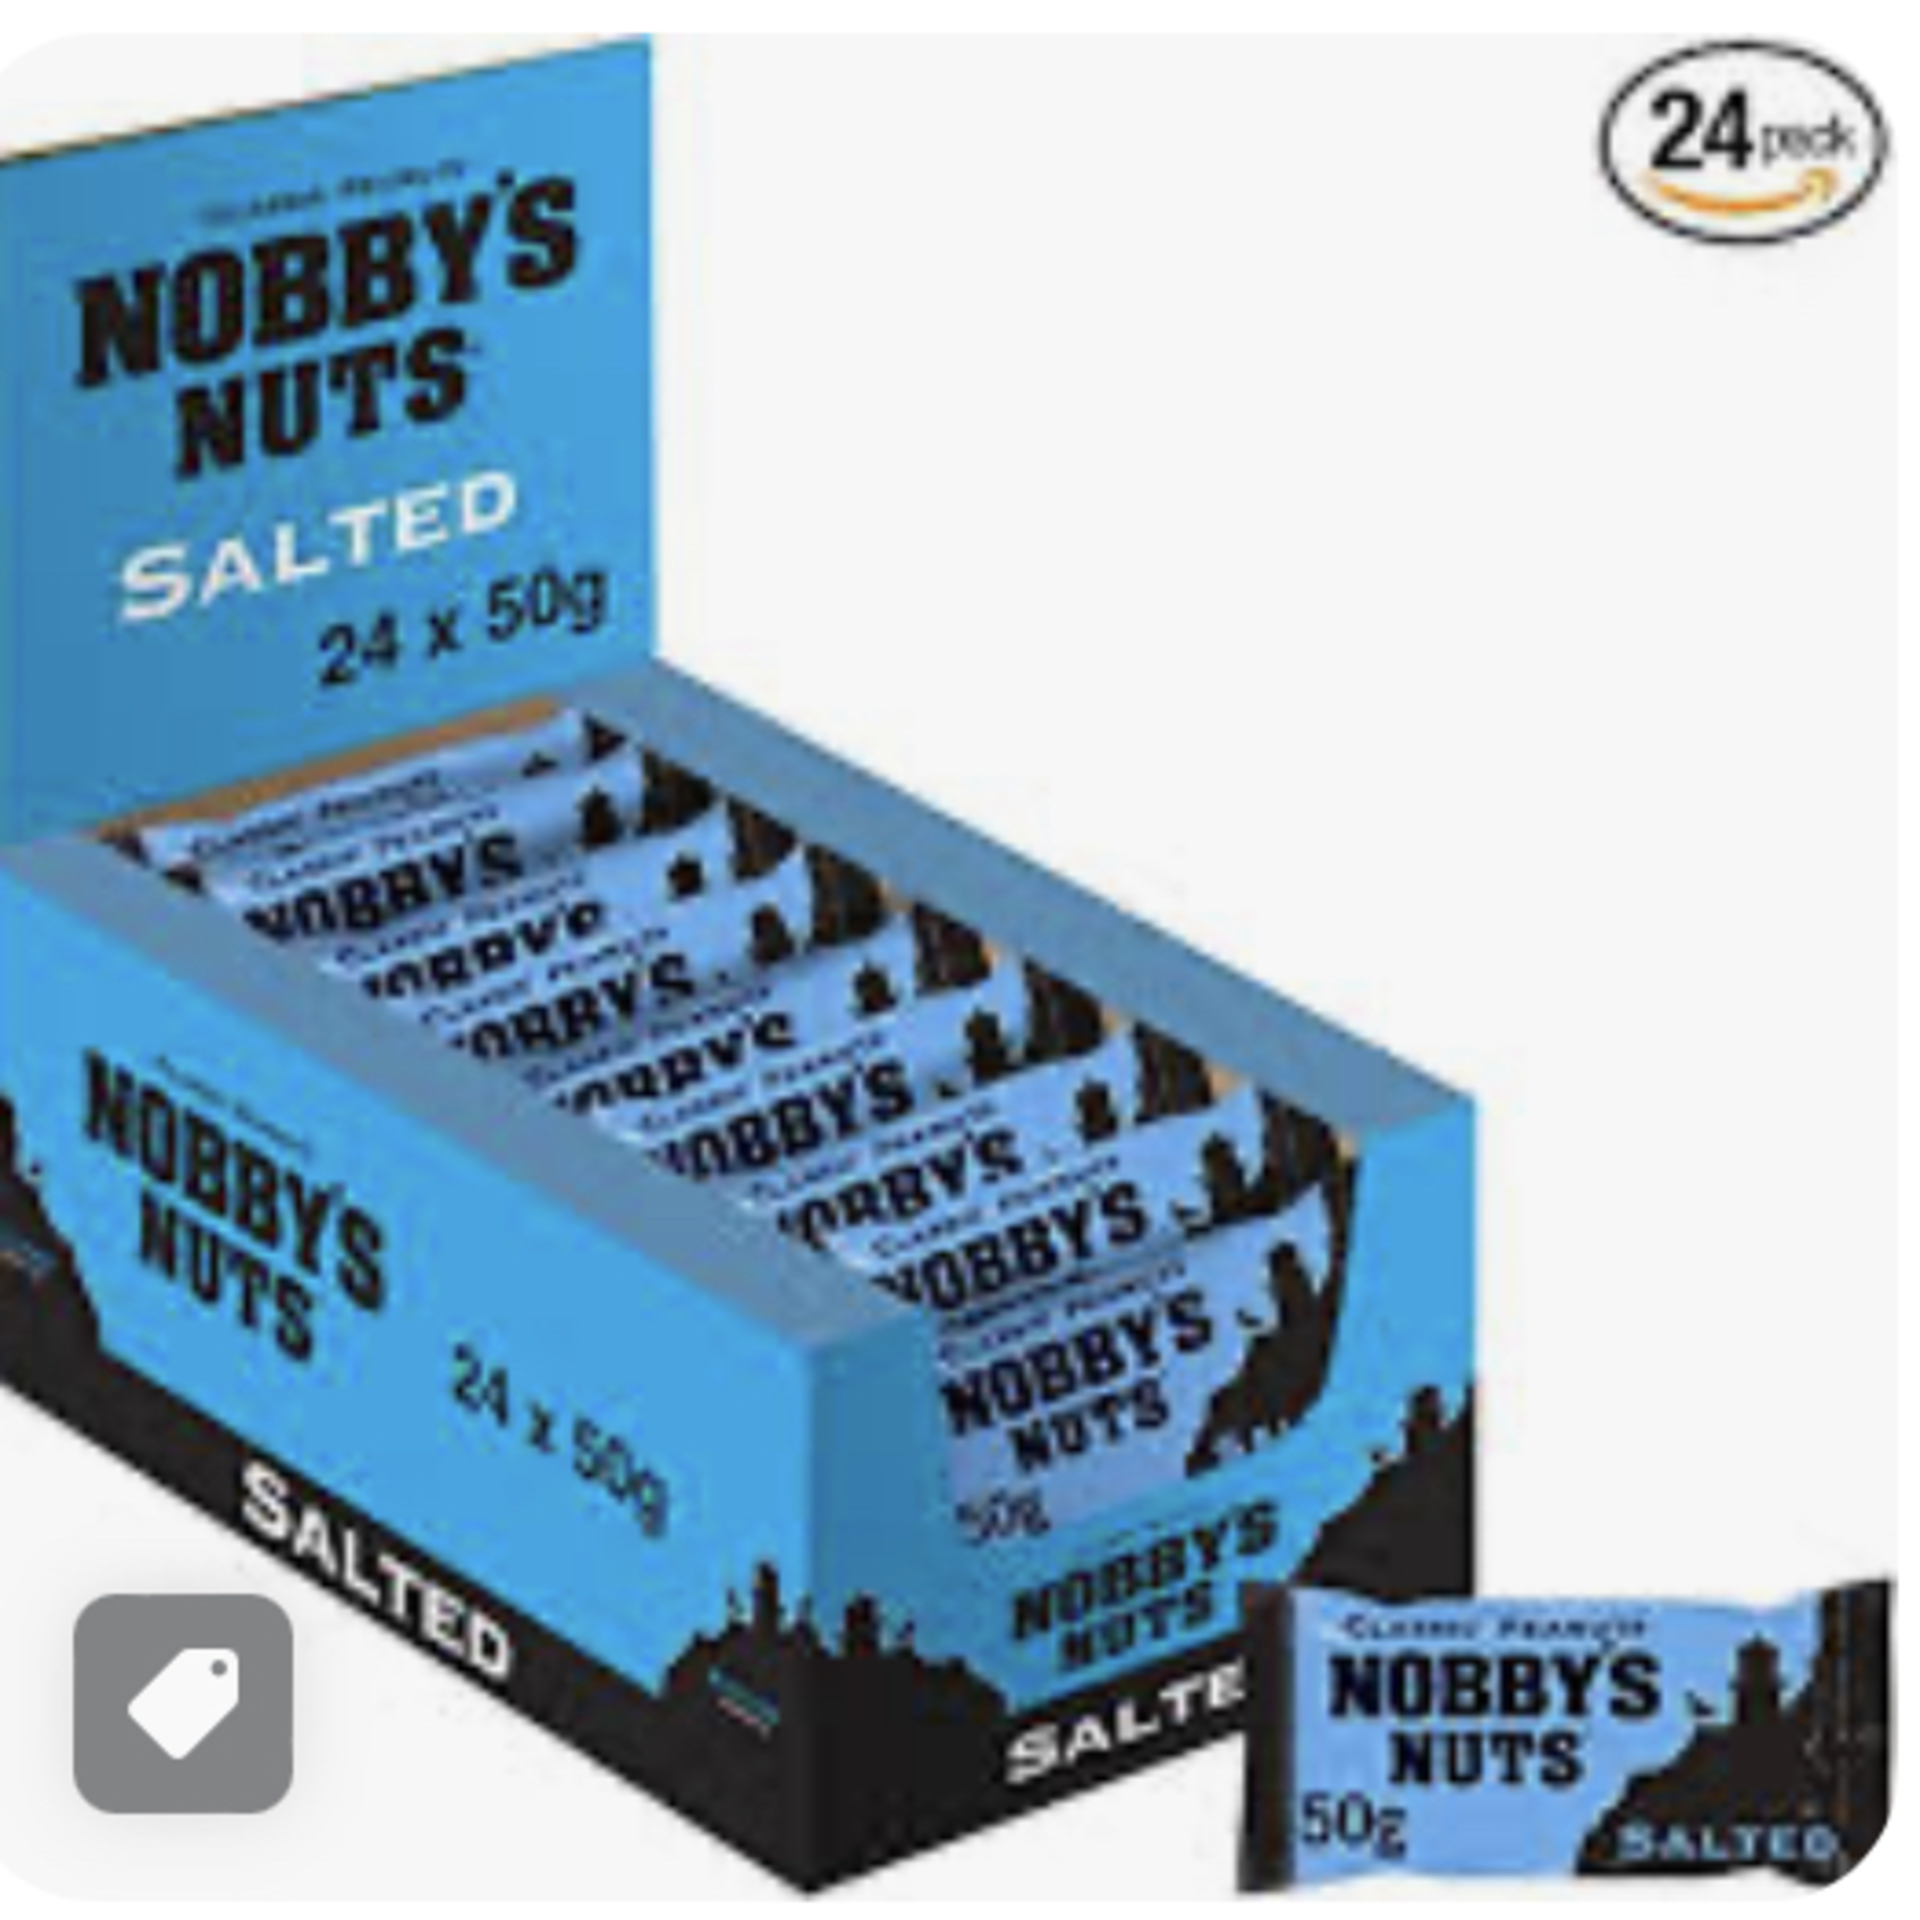 RRP £1988 (Approx. Count 168) spW44r9293w Nobby's Nuts Classic Salted Peanuts, 50g (Case of 24)